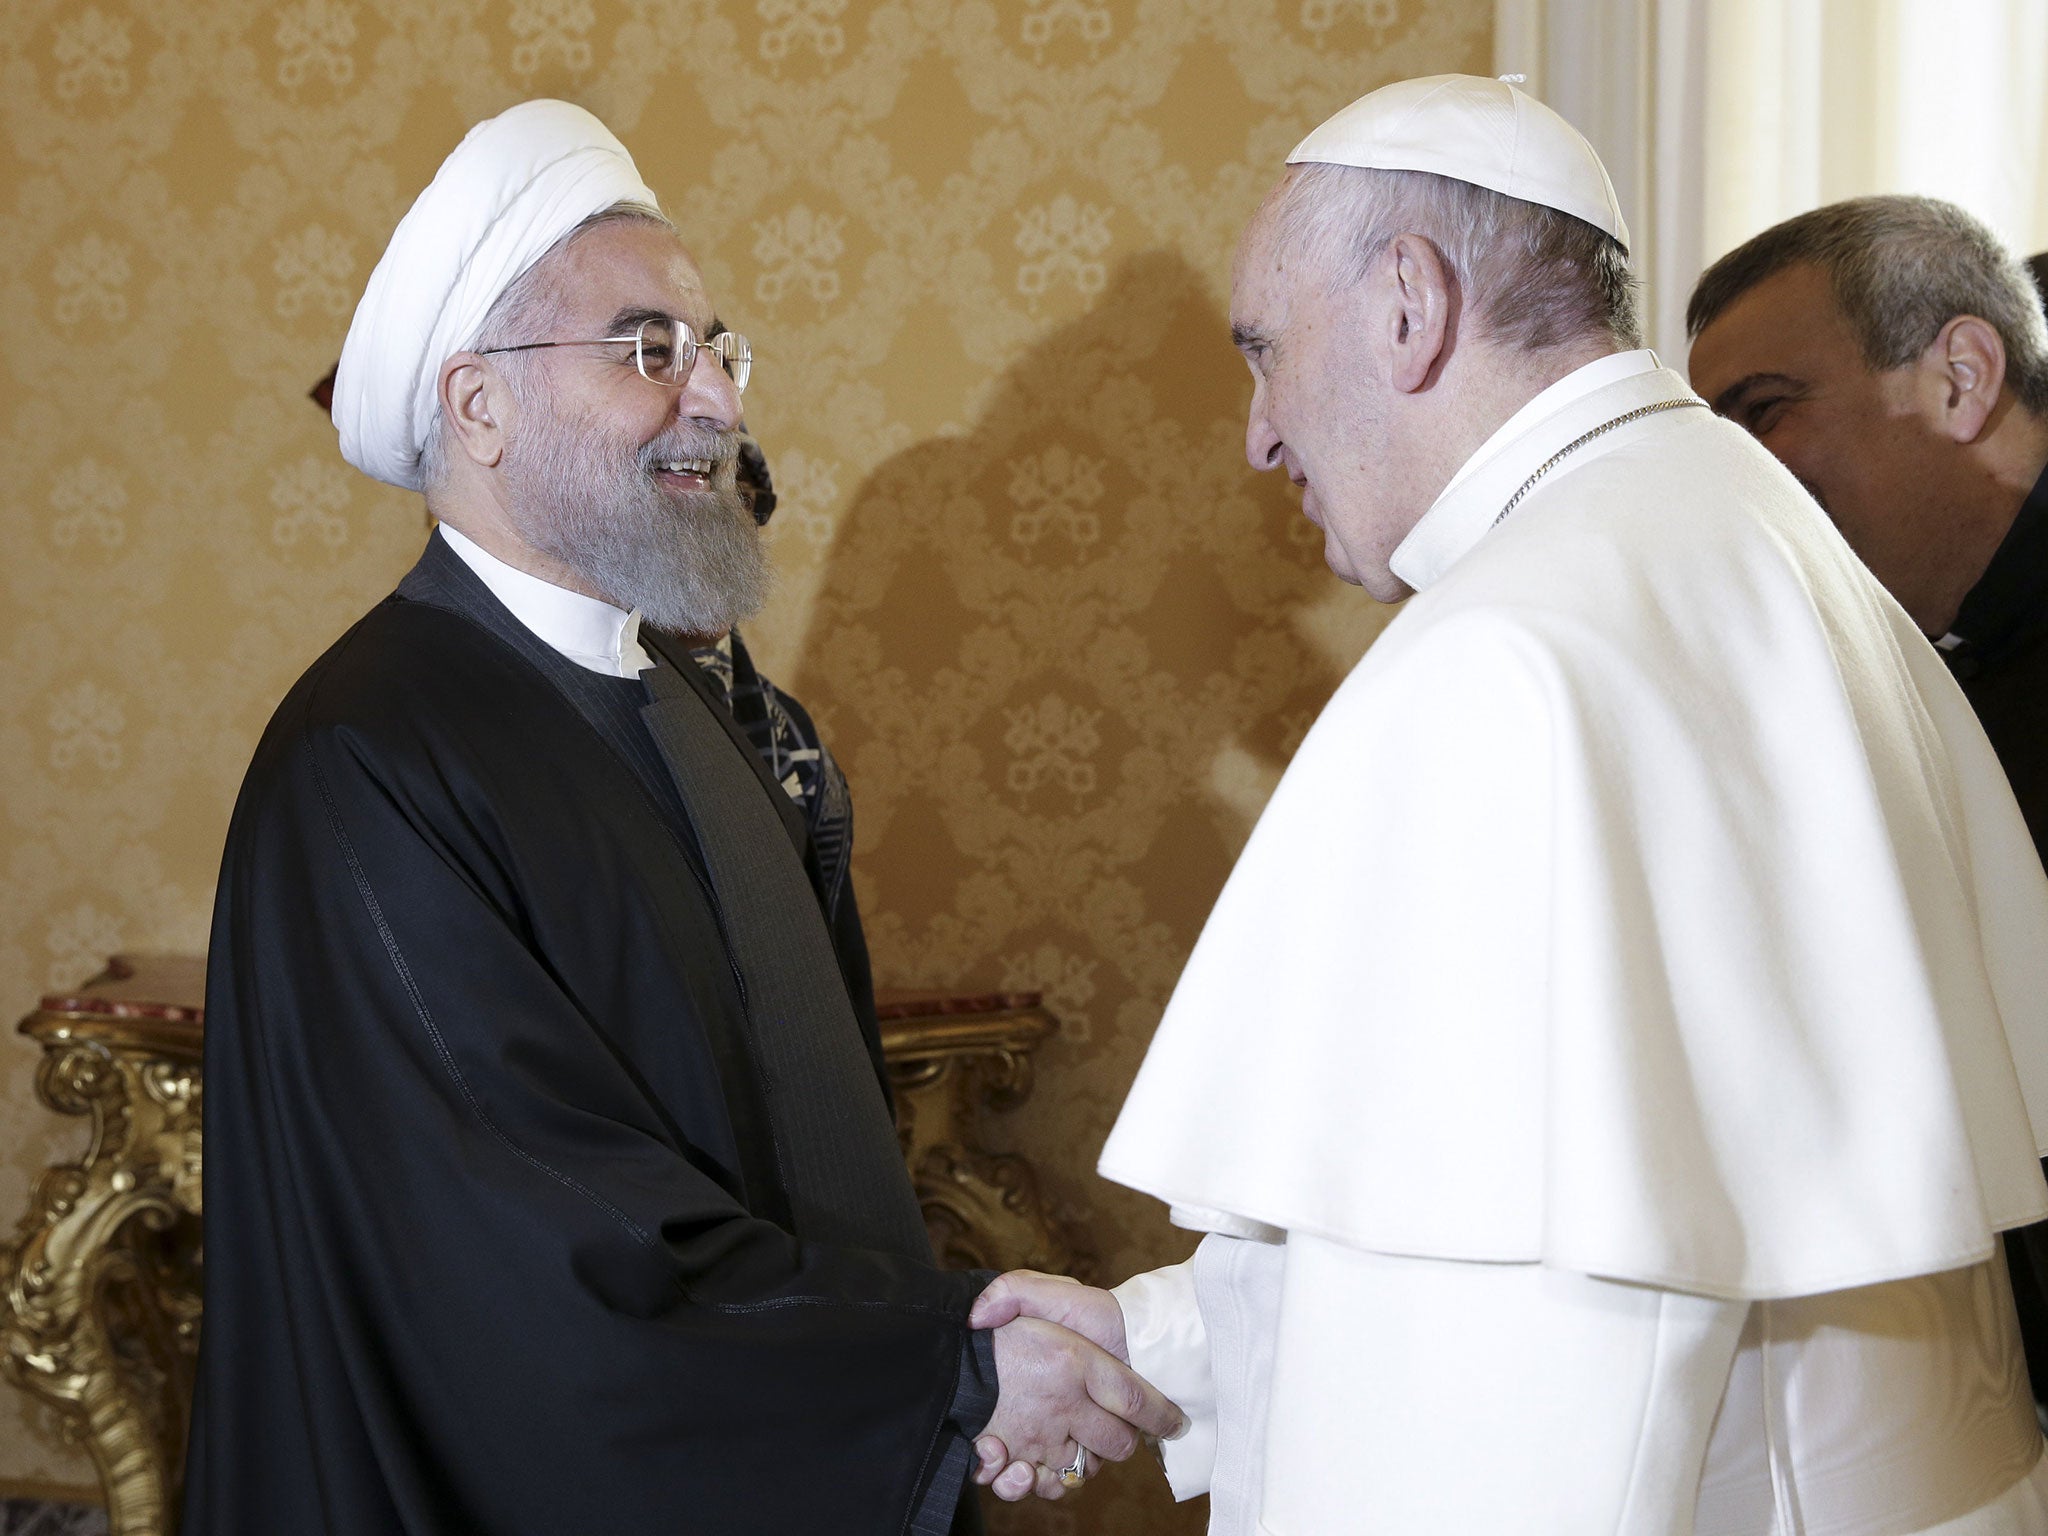 Iran's President Hassan Rouhani (L) is welcomed by Pope Francis at the Vatican January 26, 2016